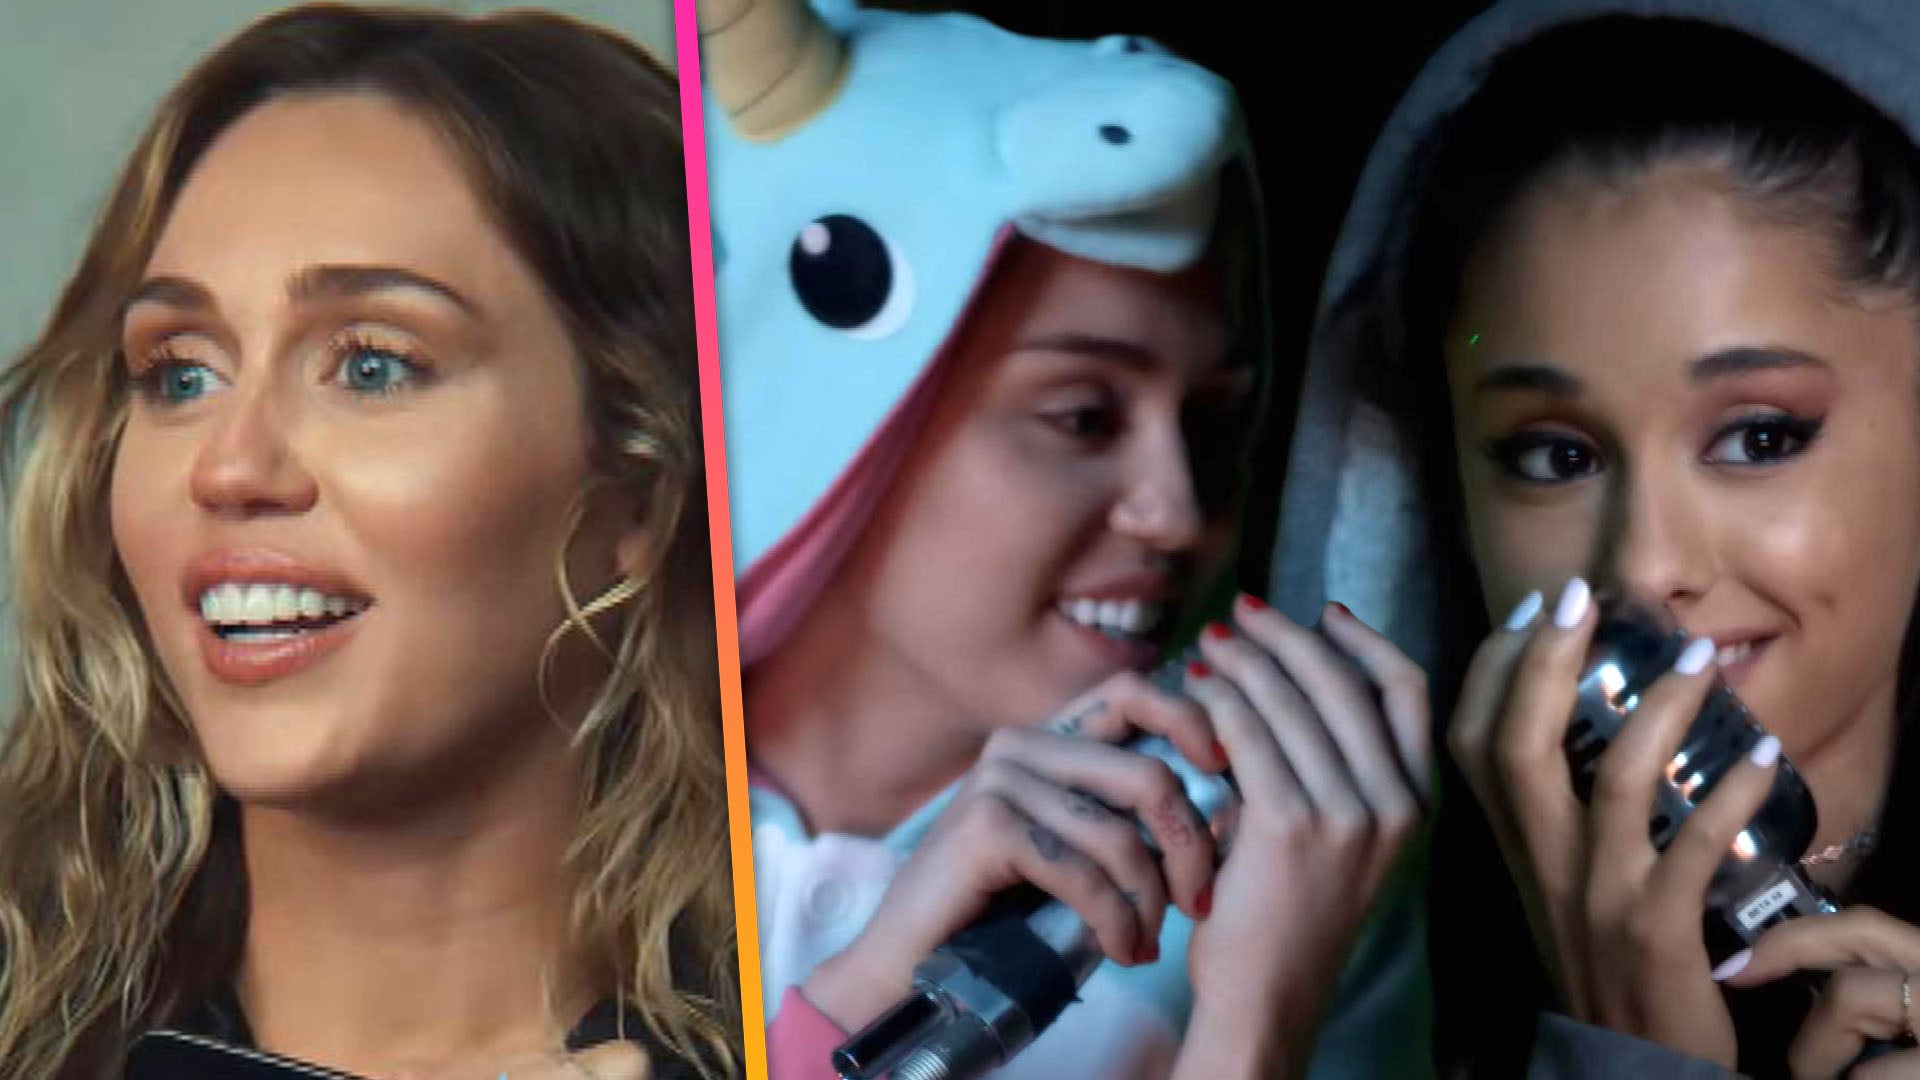 Miley Cyrus Says Ariana Grande Was 'Scared' by Their Flirty Duet in Viral Performance